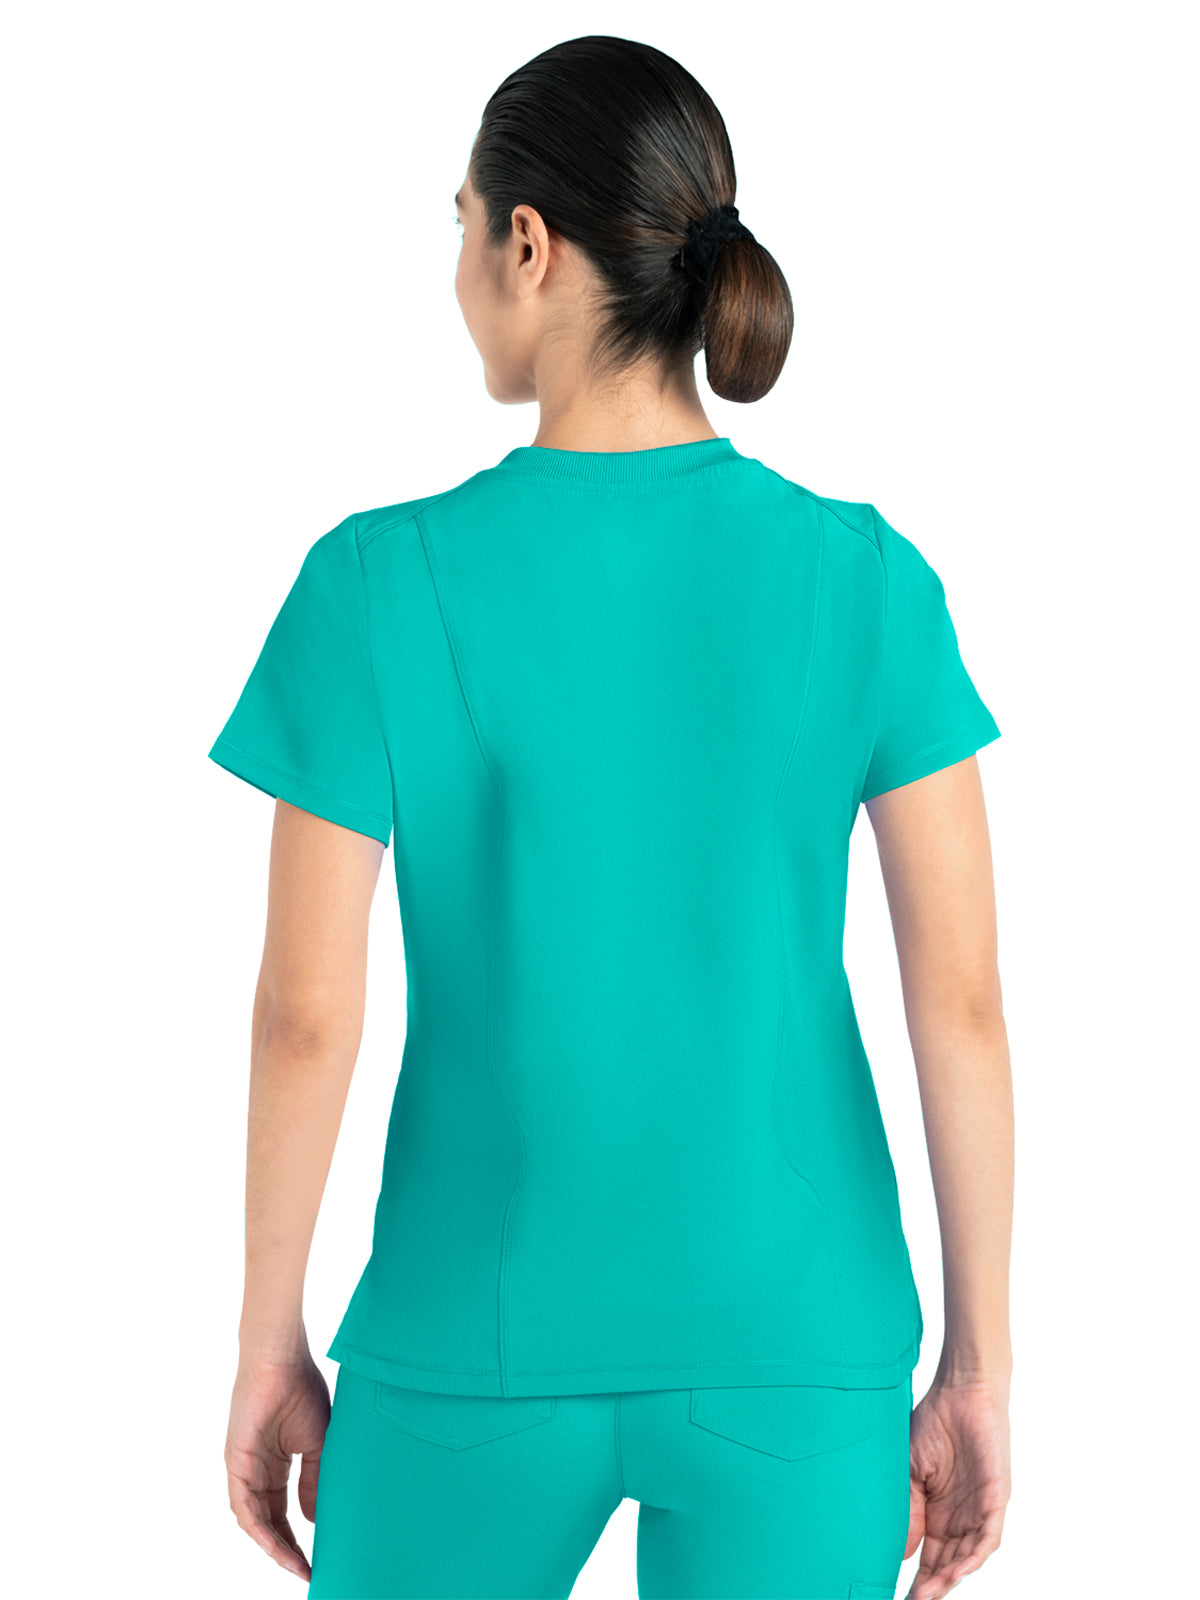 Women's Active Fashion Top - 1514 - Teal